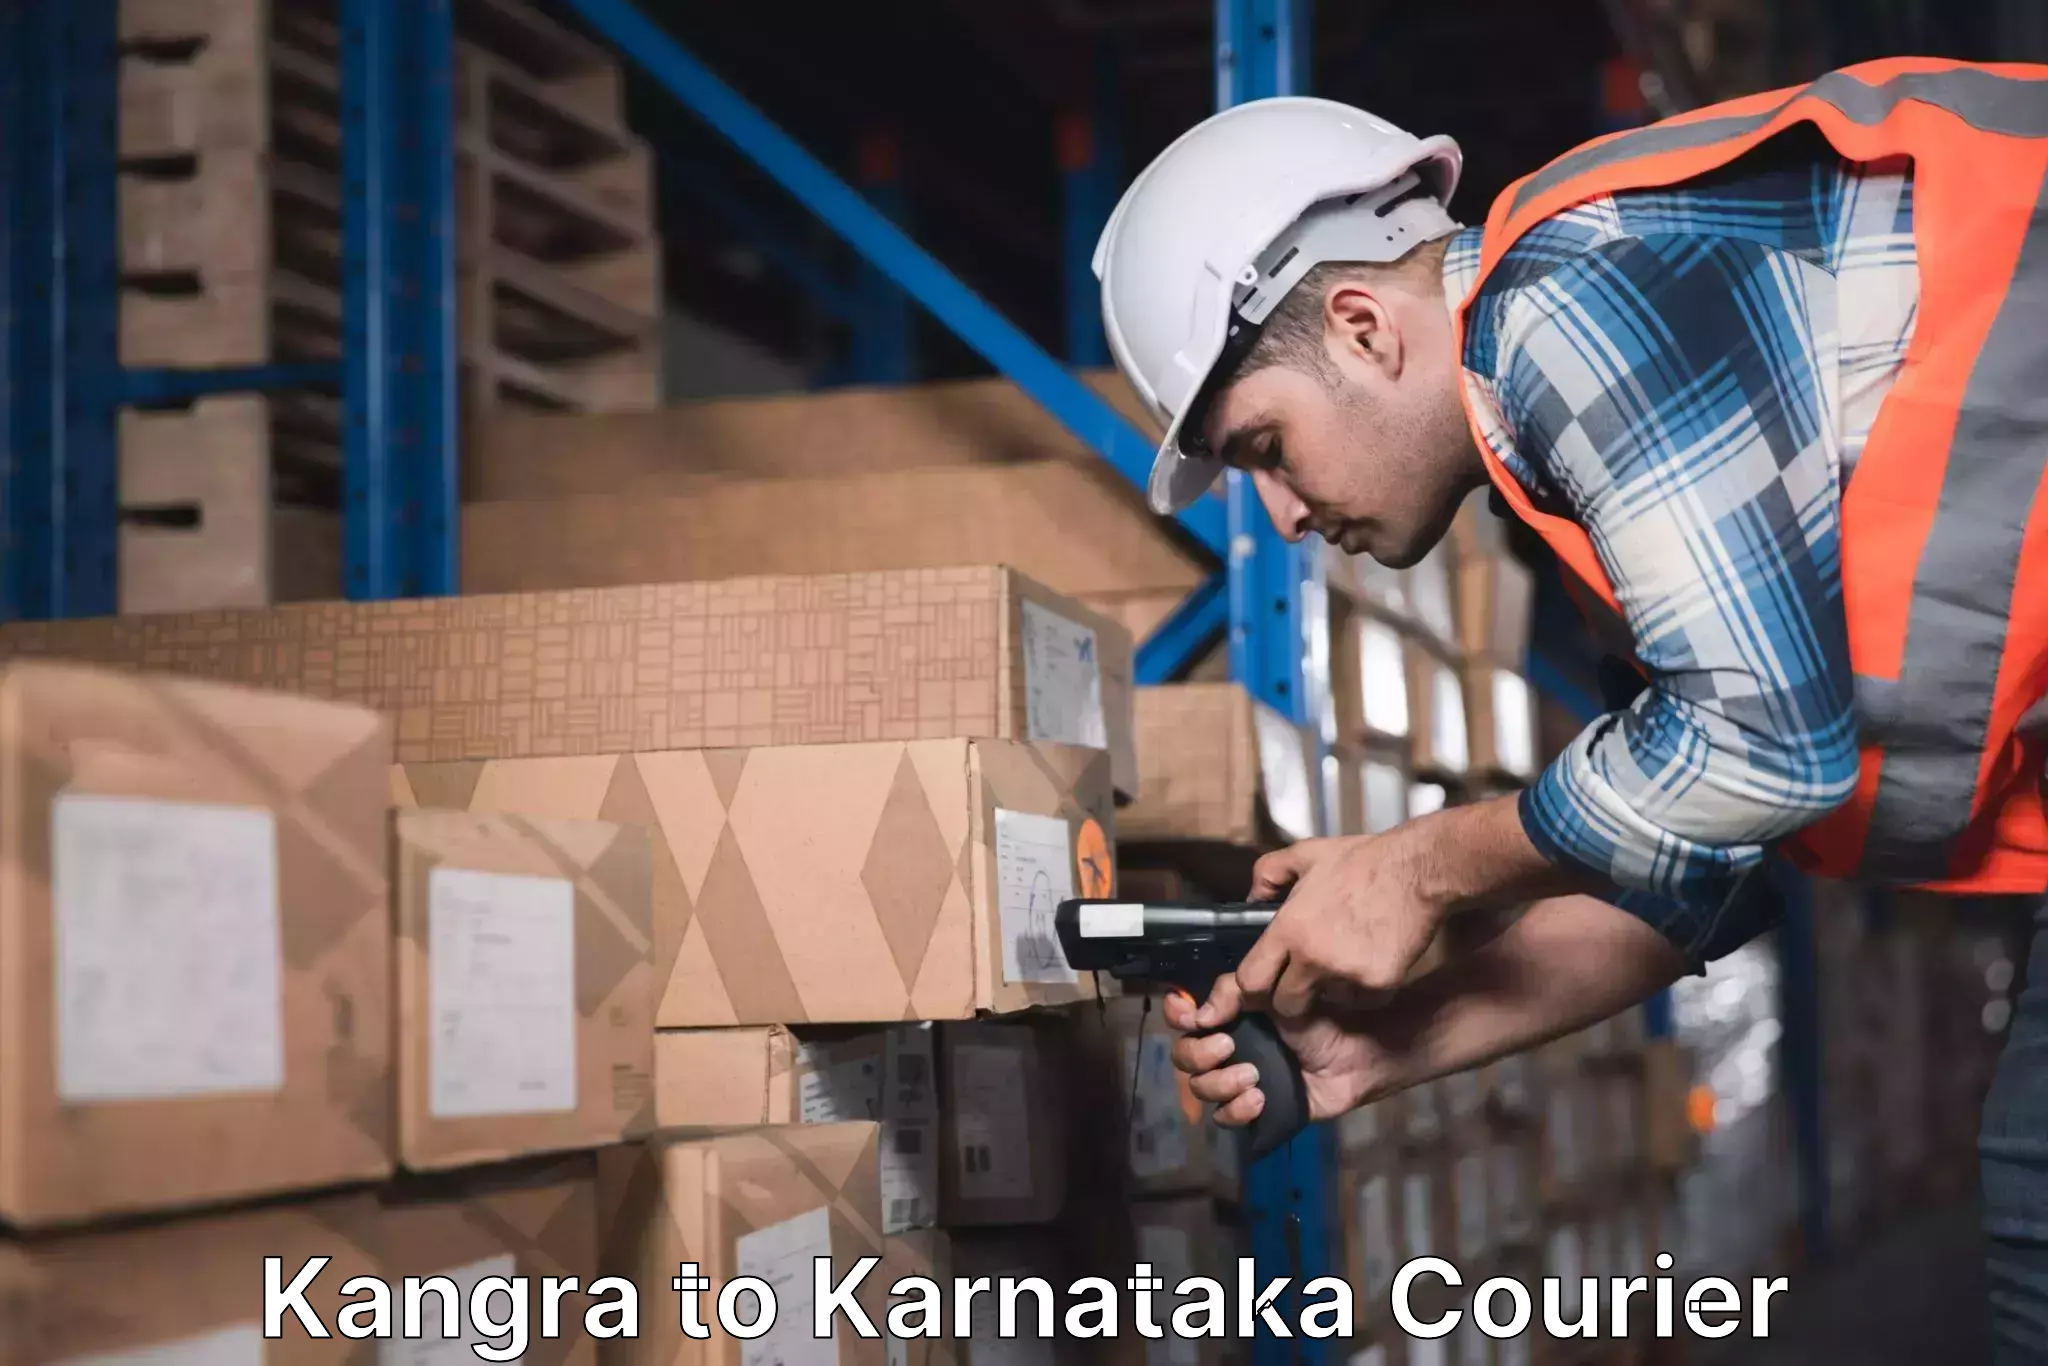 Efficient order fulfillment Kangra to Chikmagalur